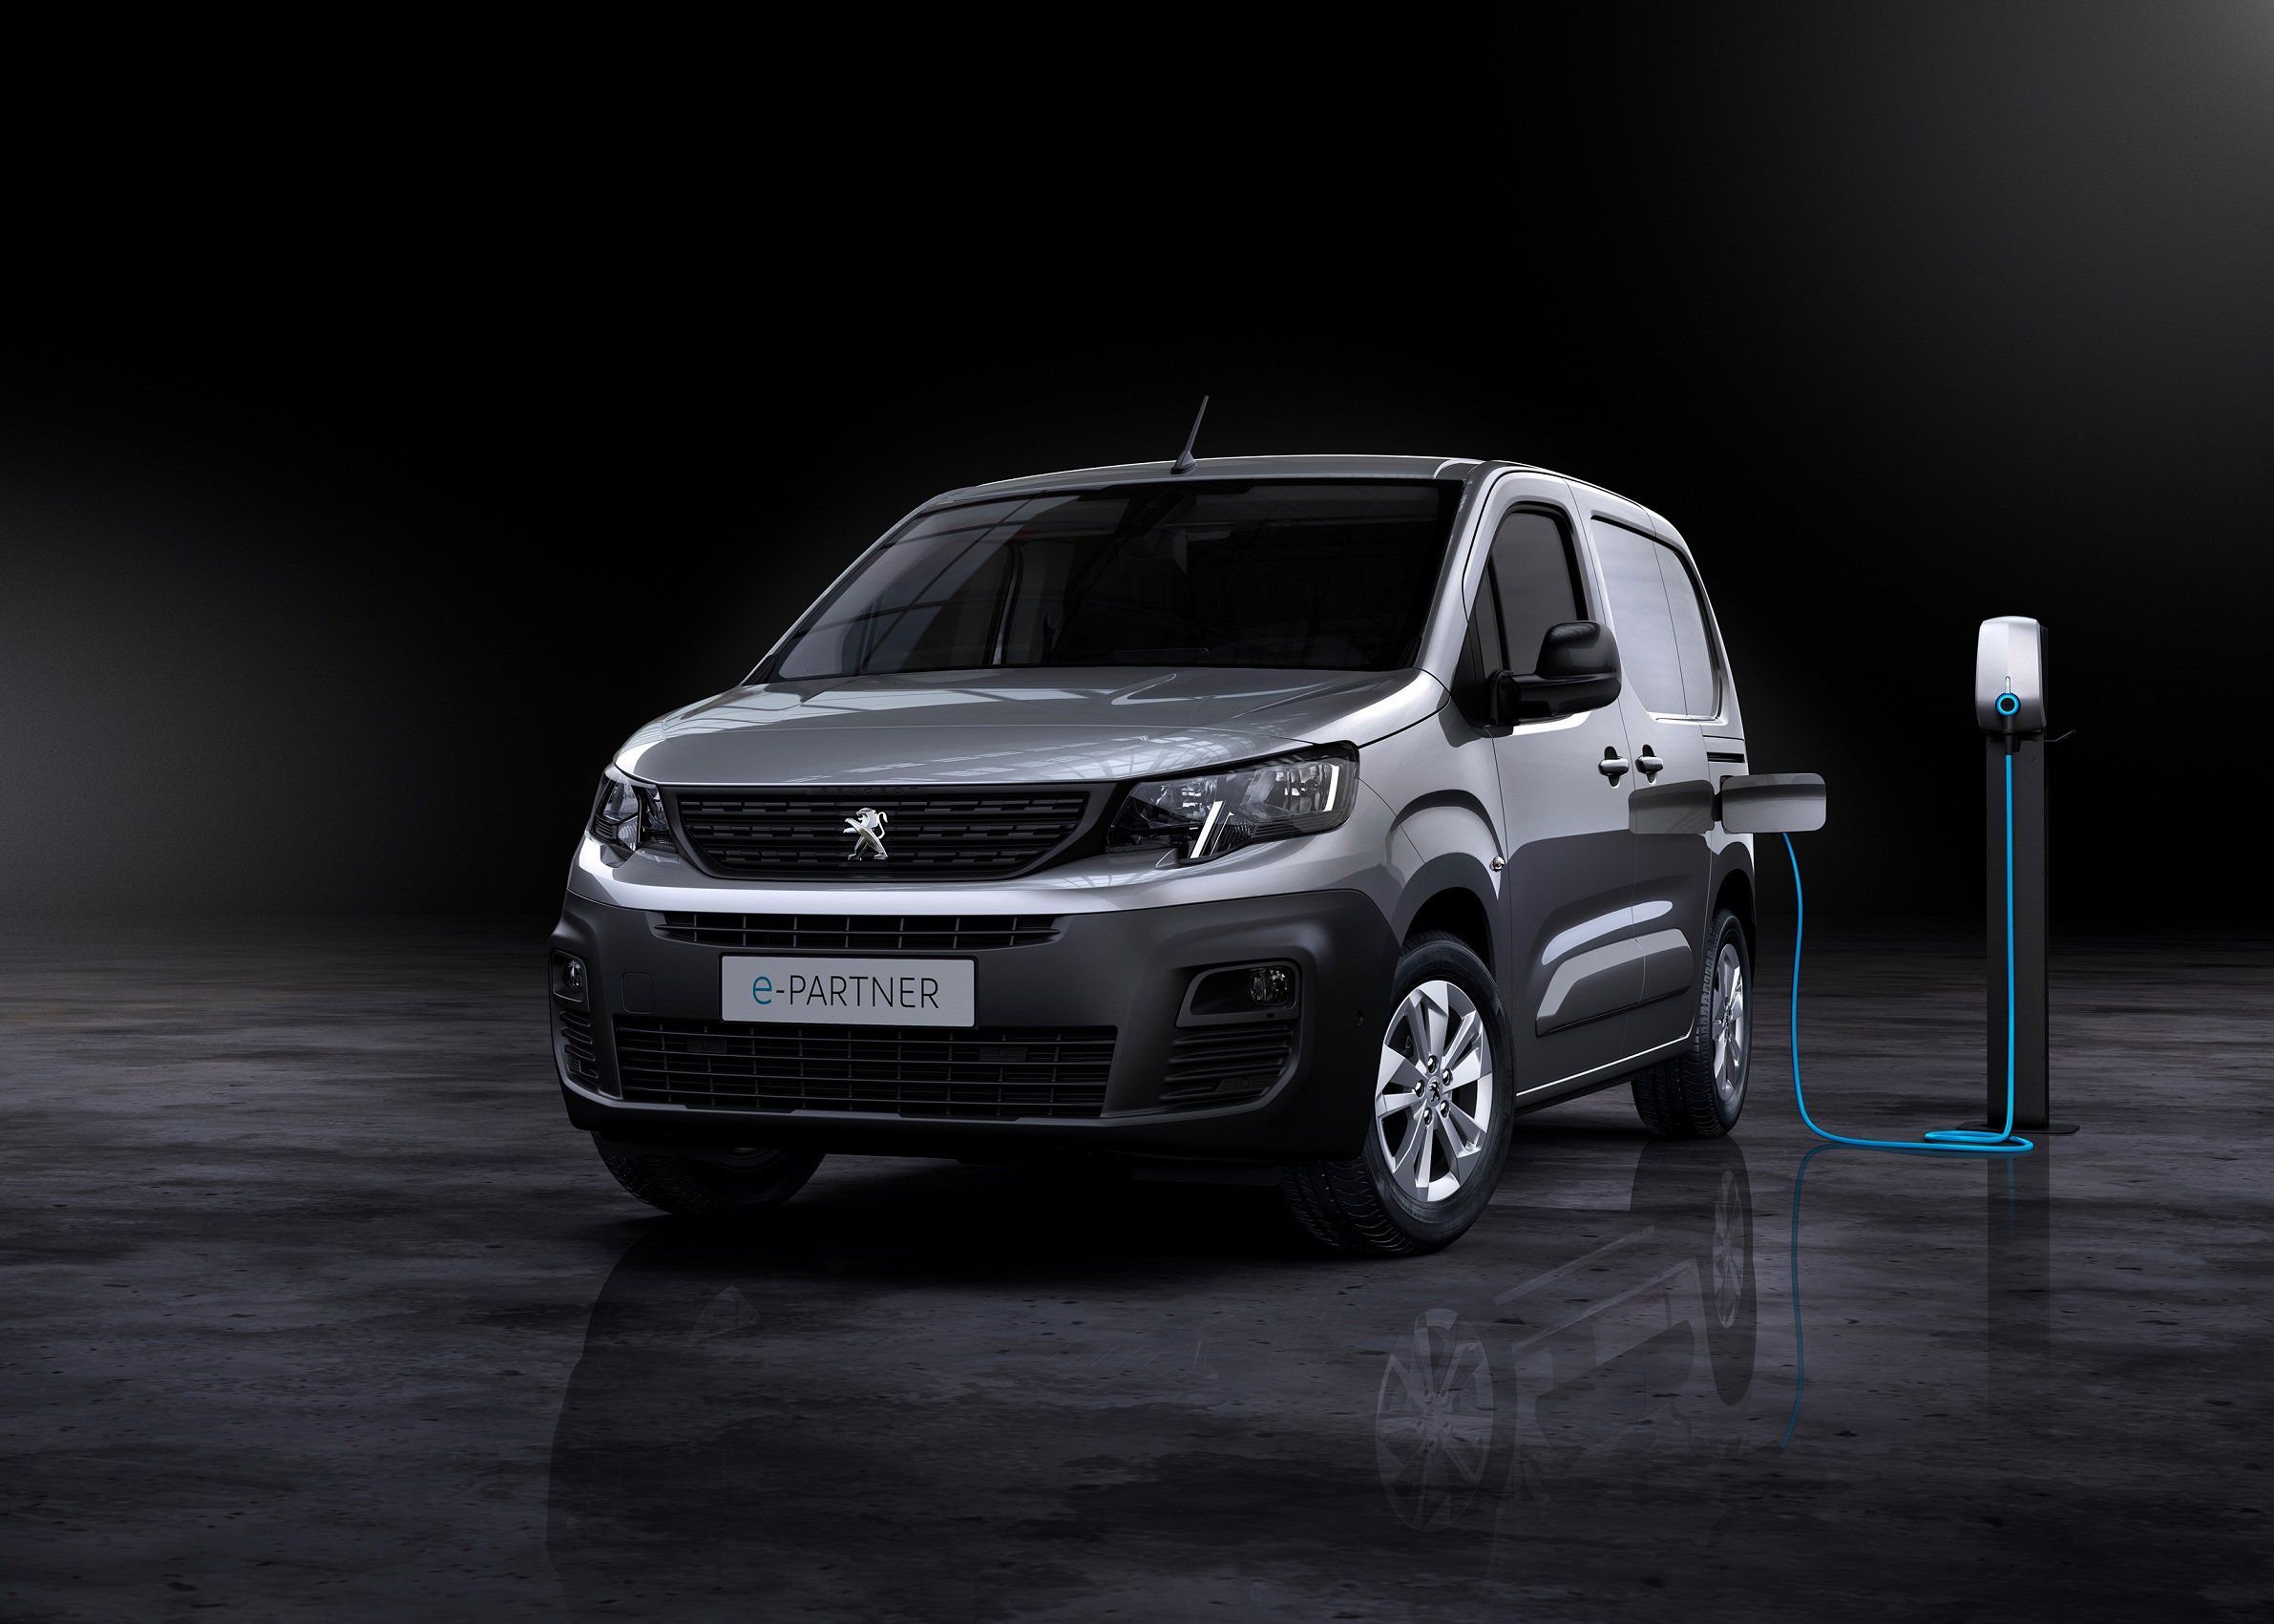 PEUGEOT Abu Dhabi & Al Ain Delivers its First Fully Electric LCV in Abu Dhabi